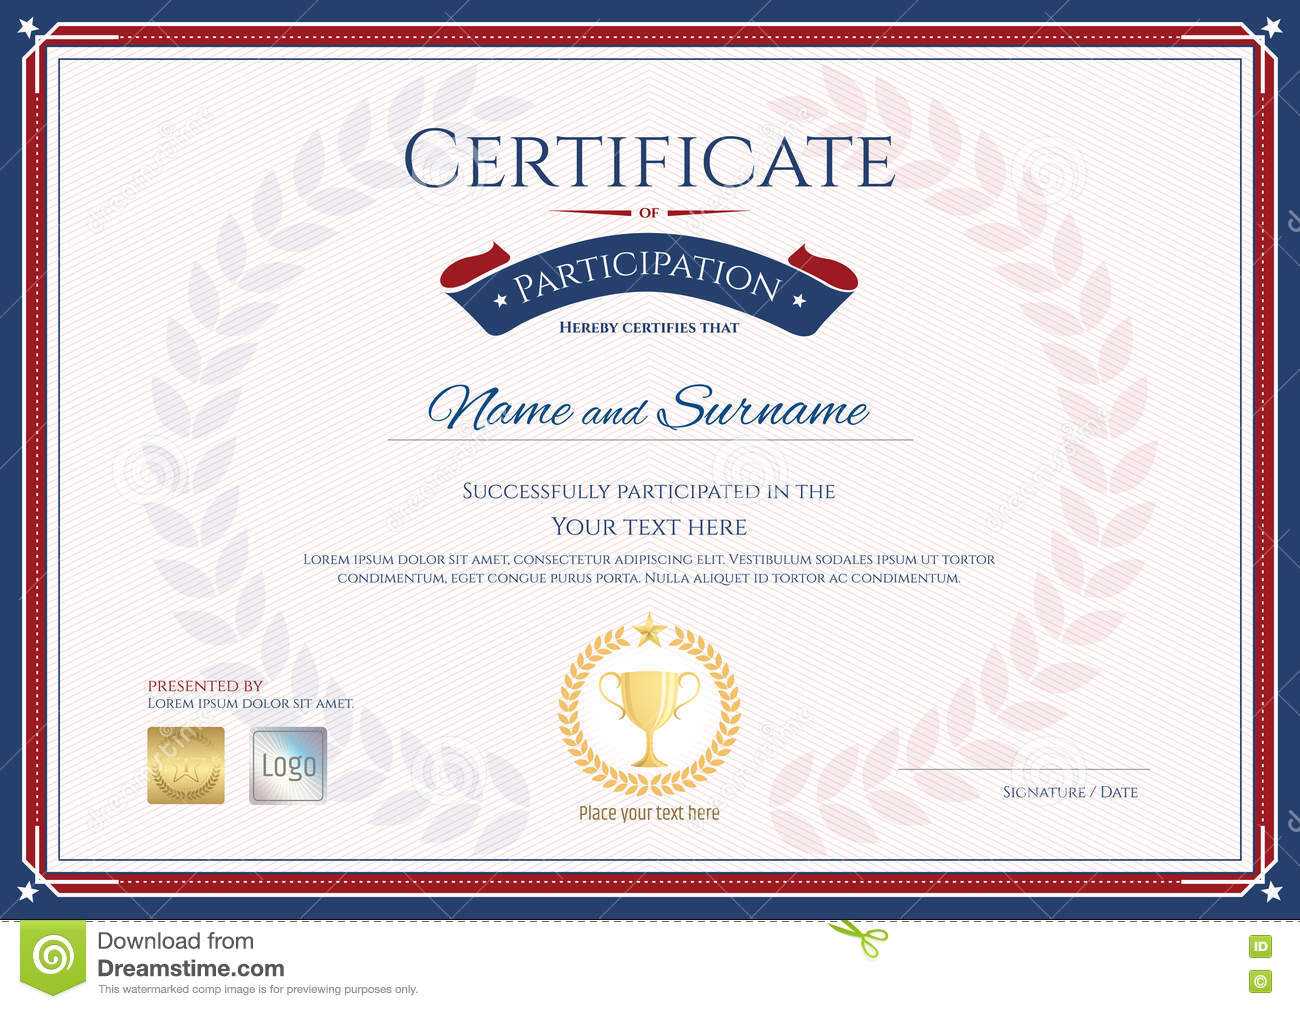 Certificate Of Participation Free Template – Calep Inside Certification Of Participation Free Template